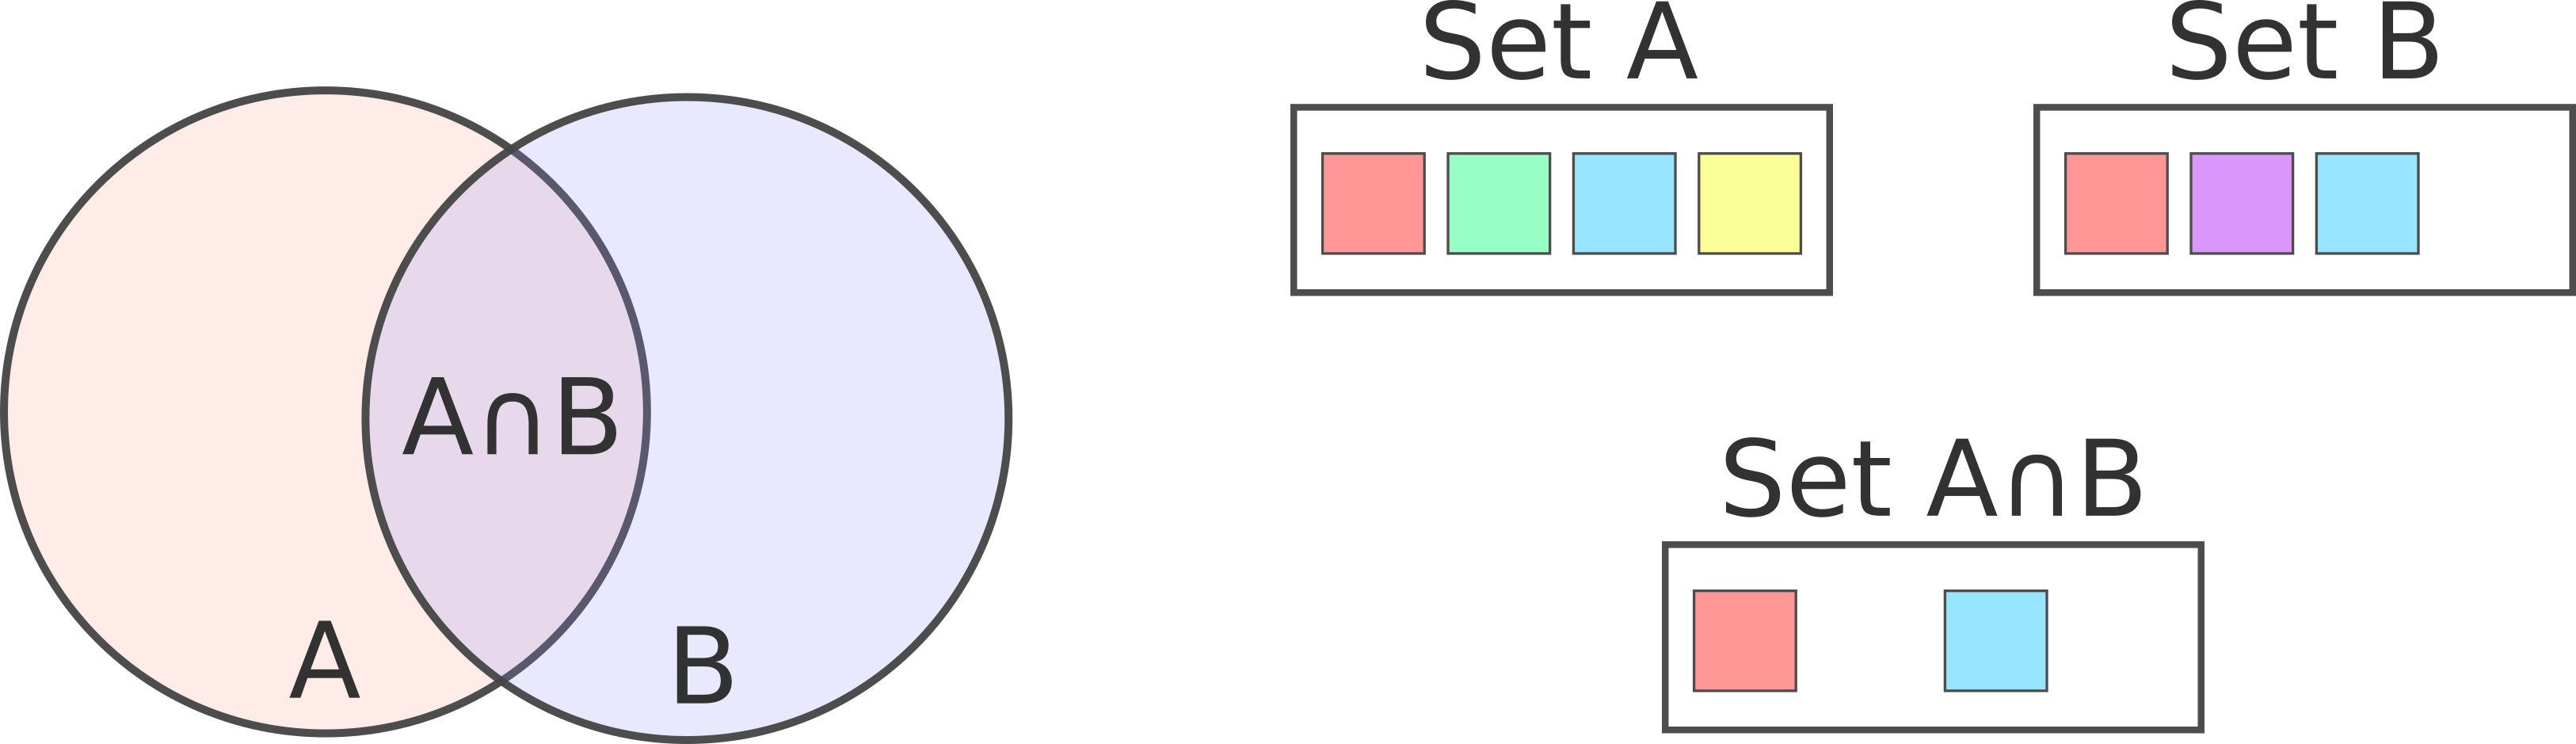 Selector intersection